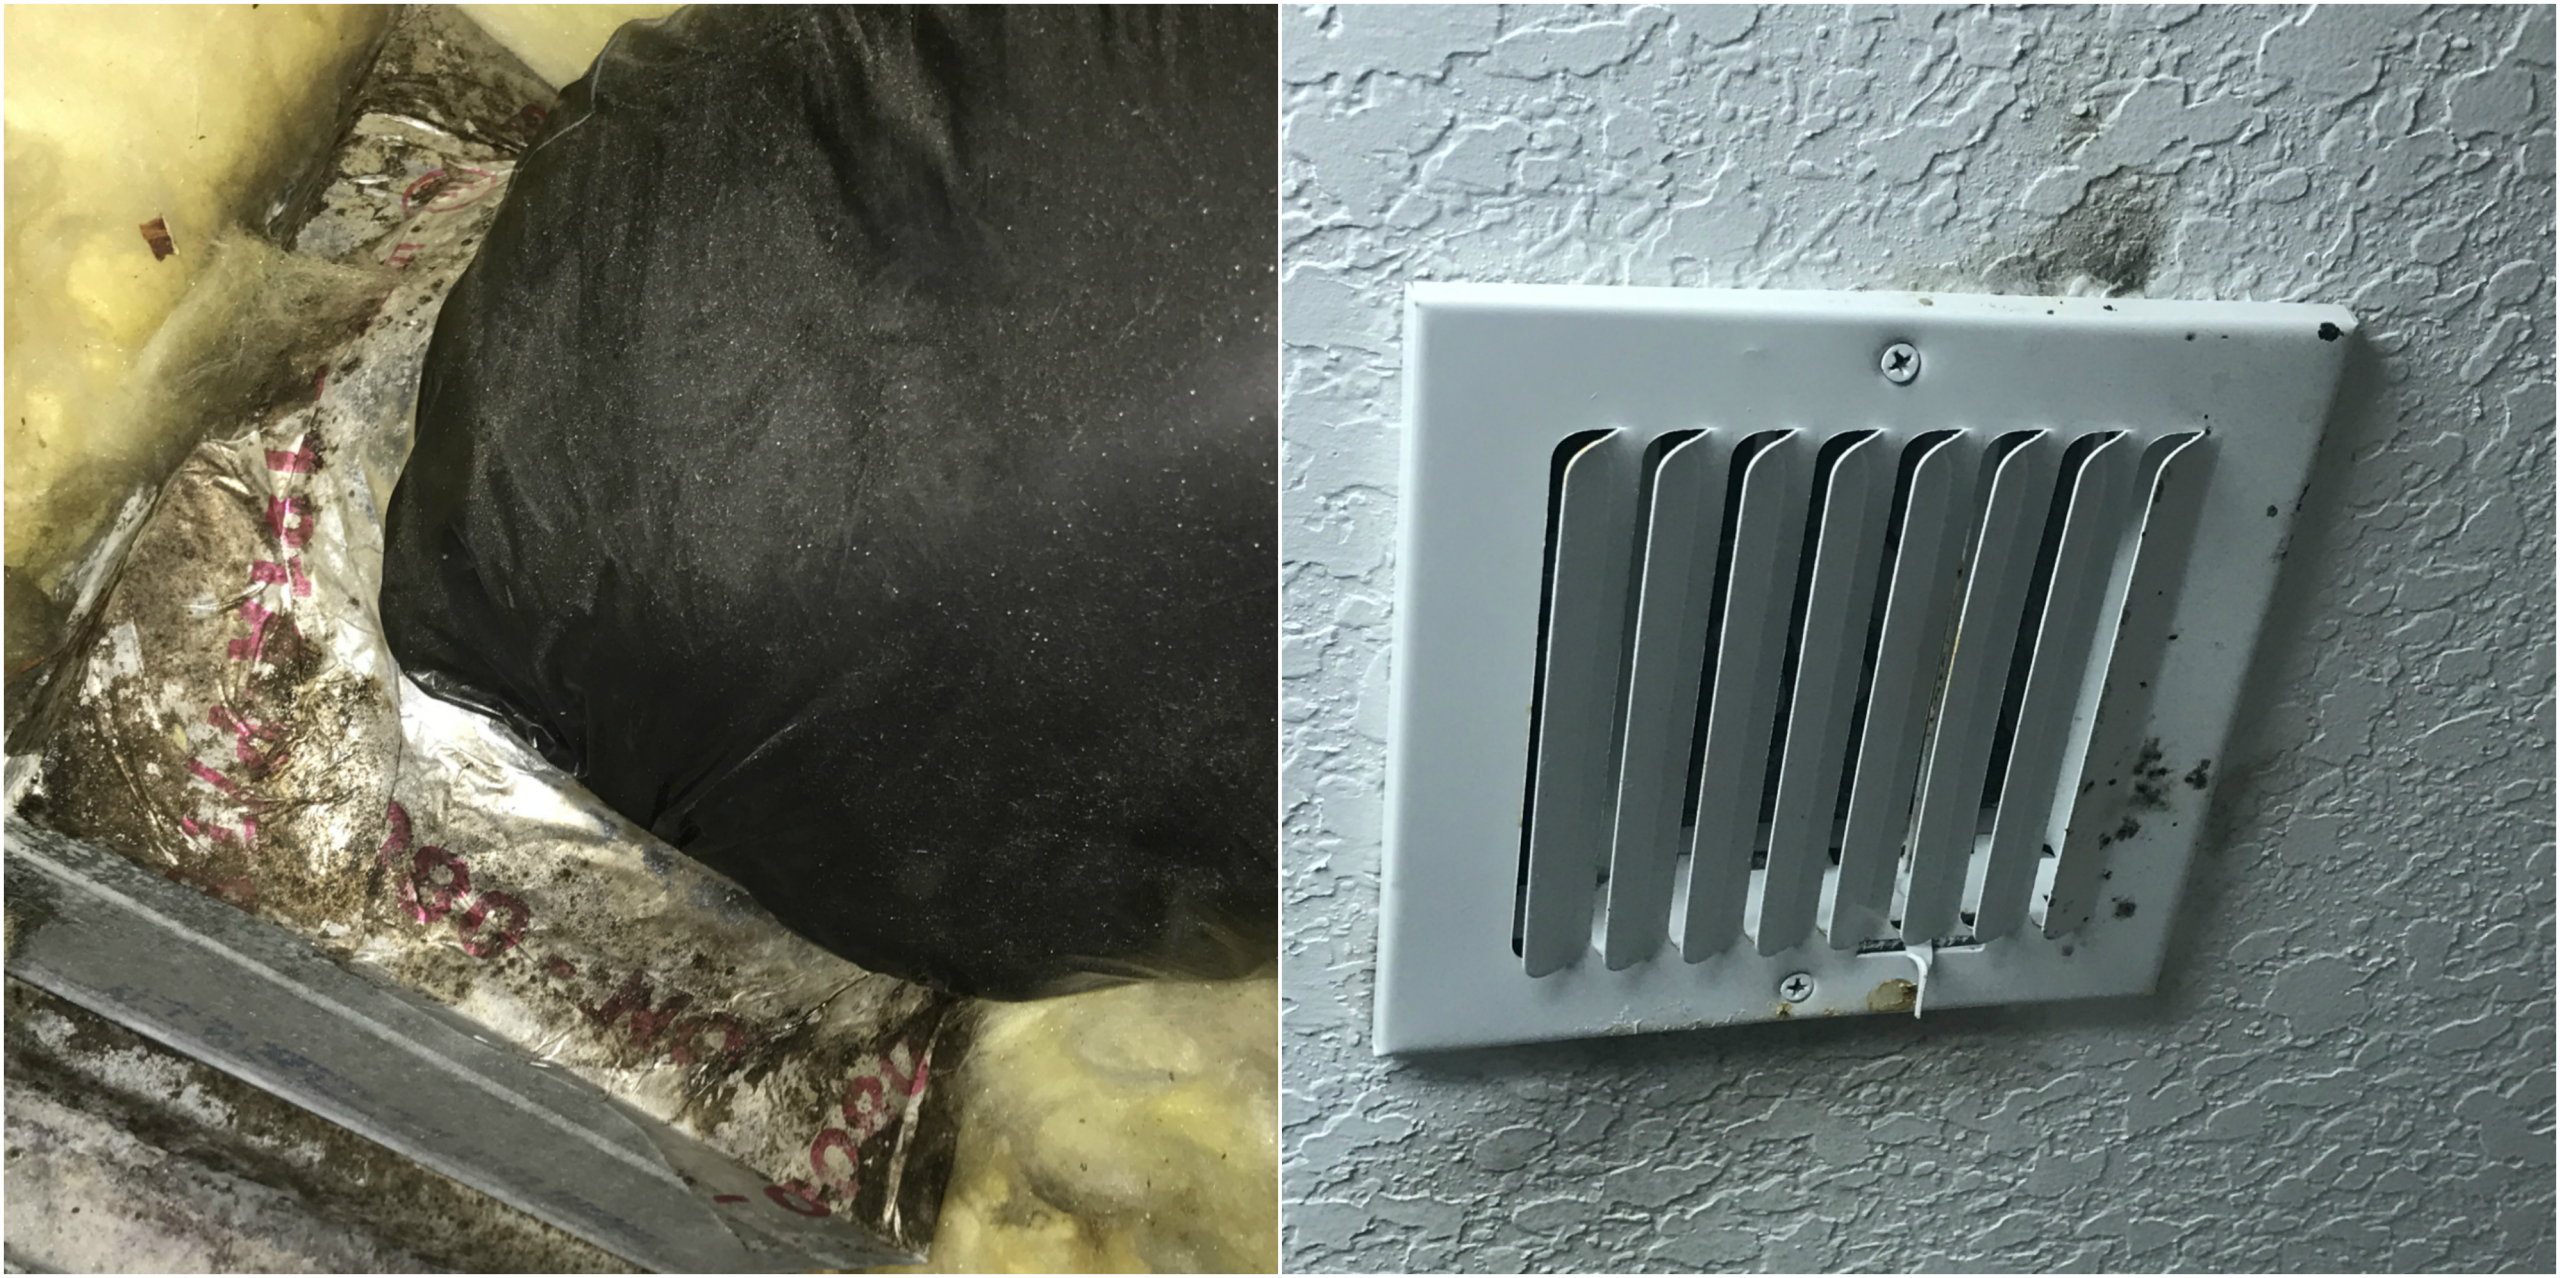 Black Growth On Ac Vents Makes House Sick Mammoth Restoration pertaining to measurements 3994 X 1994